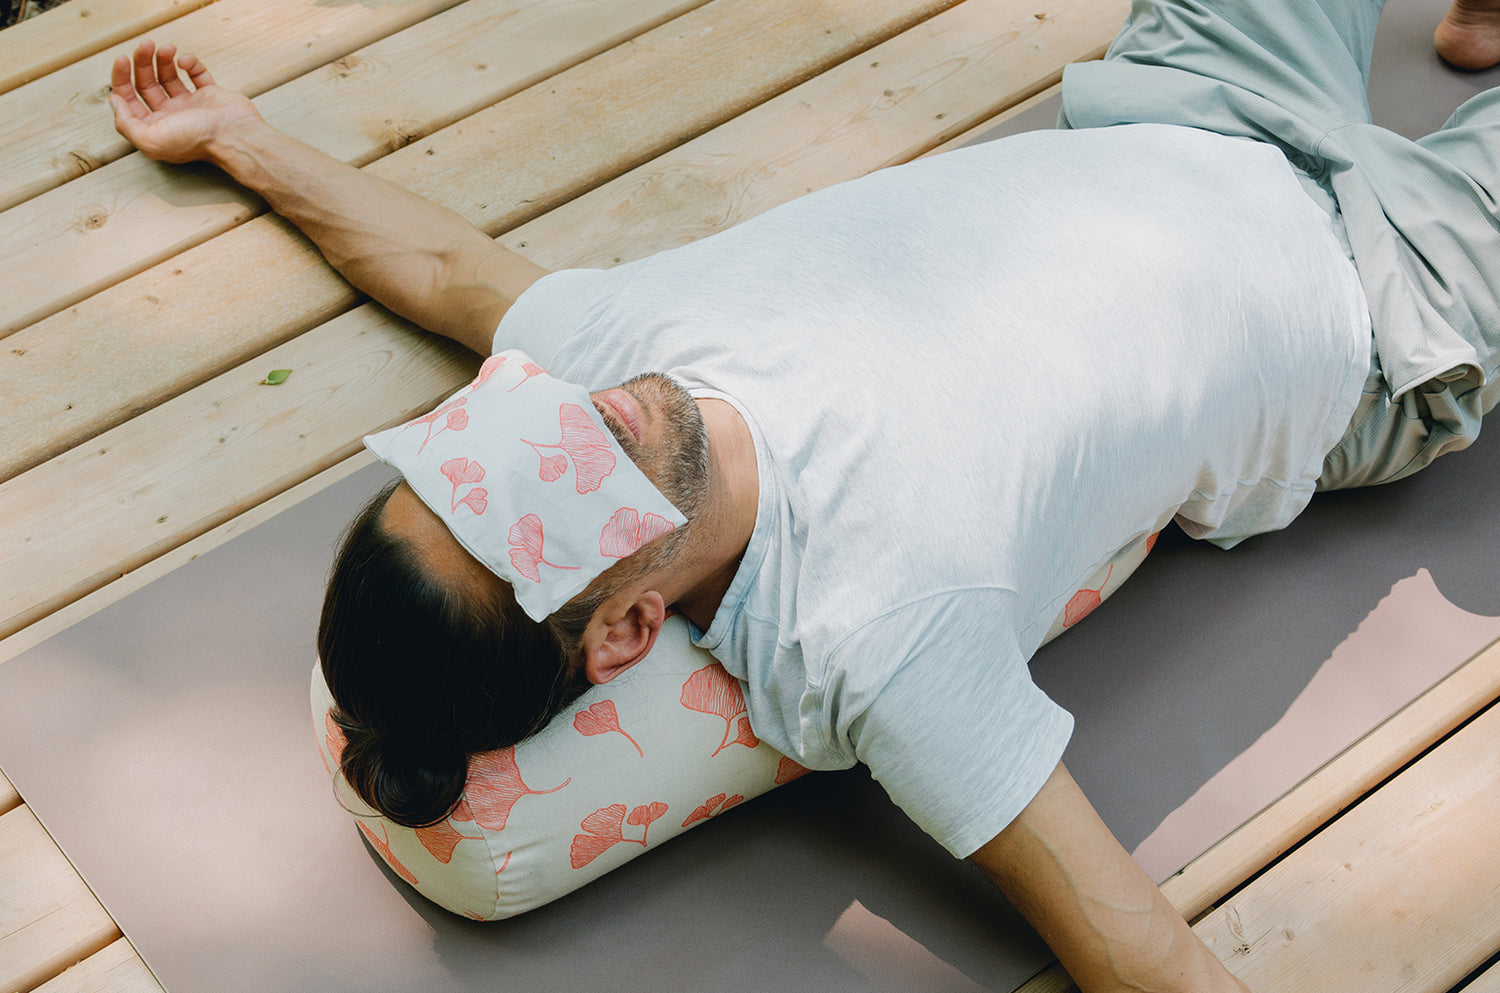 5 Restorative Yoga Poses to Soothe Stress and Worry About Change